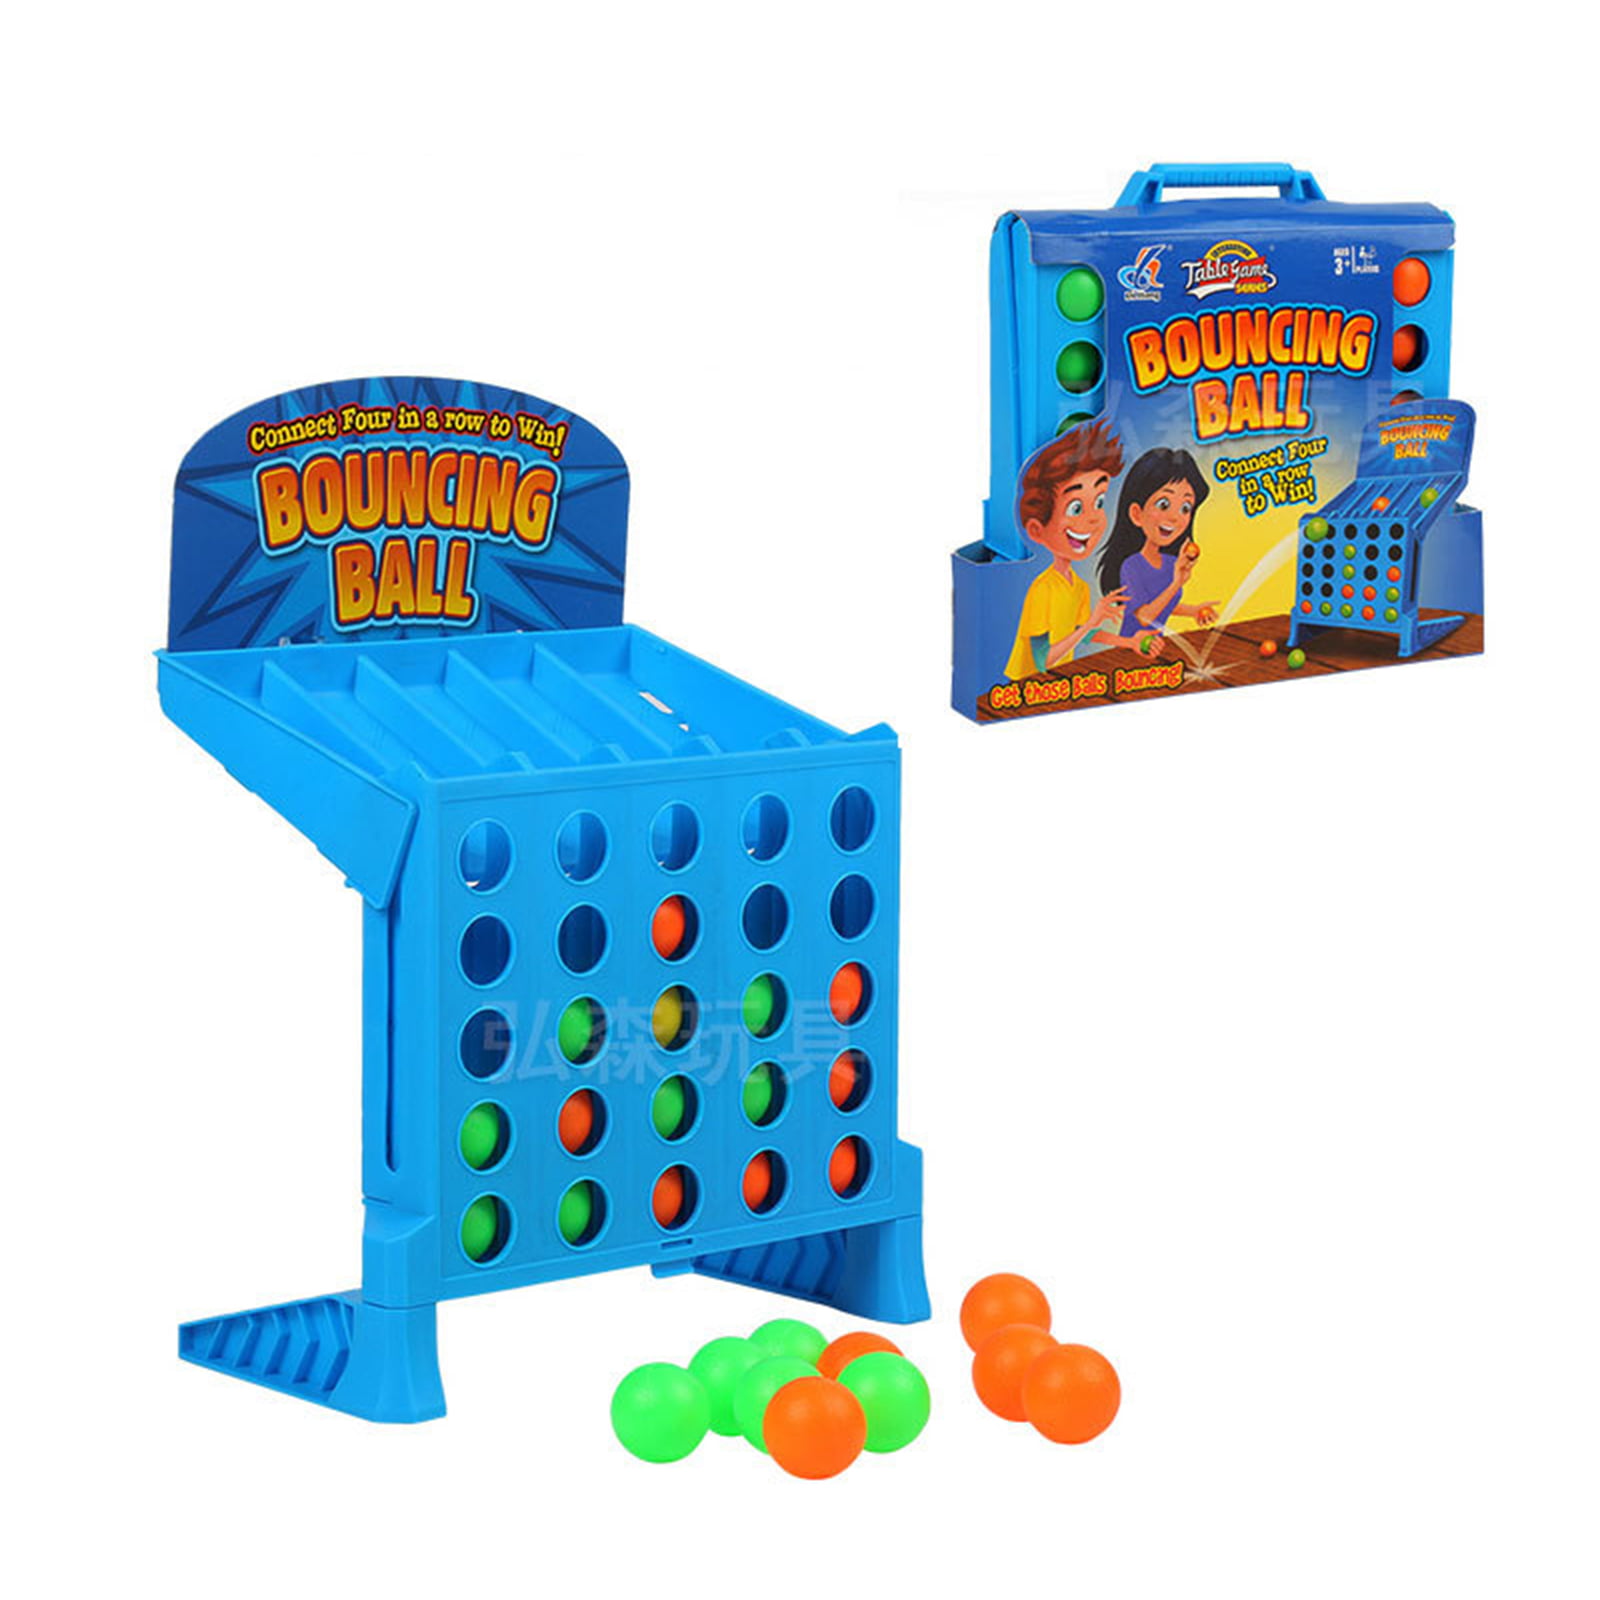 Shots Board Game Bouncing Ball Toy Competitive Excitement for Kids 8 and up Bouncing Linking Shots Bounce and Link Ball Game Bouncing 4-to-Link Shots Bounce Off Game Easy to Setup 